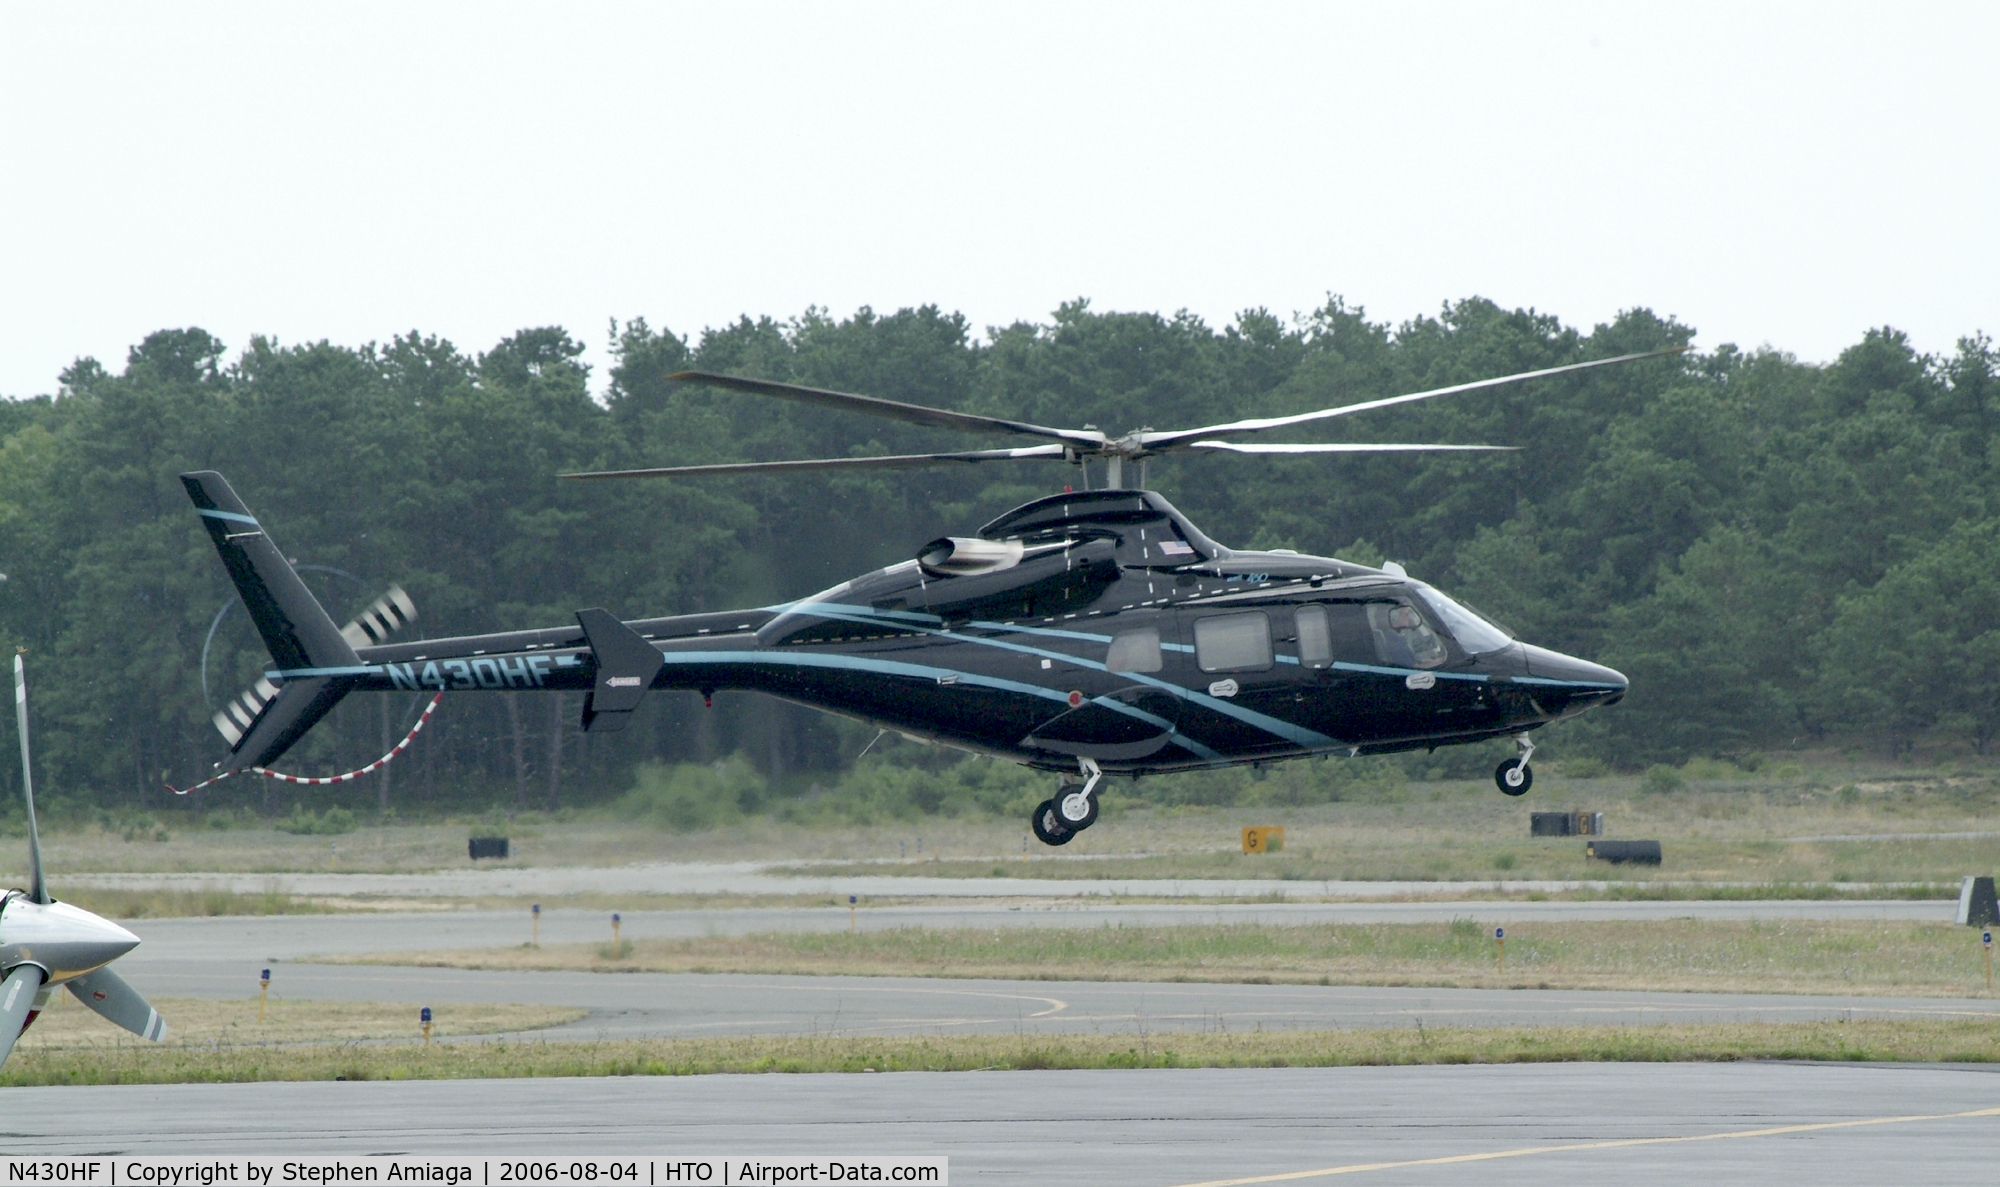 N430HF, 1999 Bell 430 C/N 49052, These 430's, 430 & 431 HF make frequent visits to HTO...